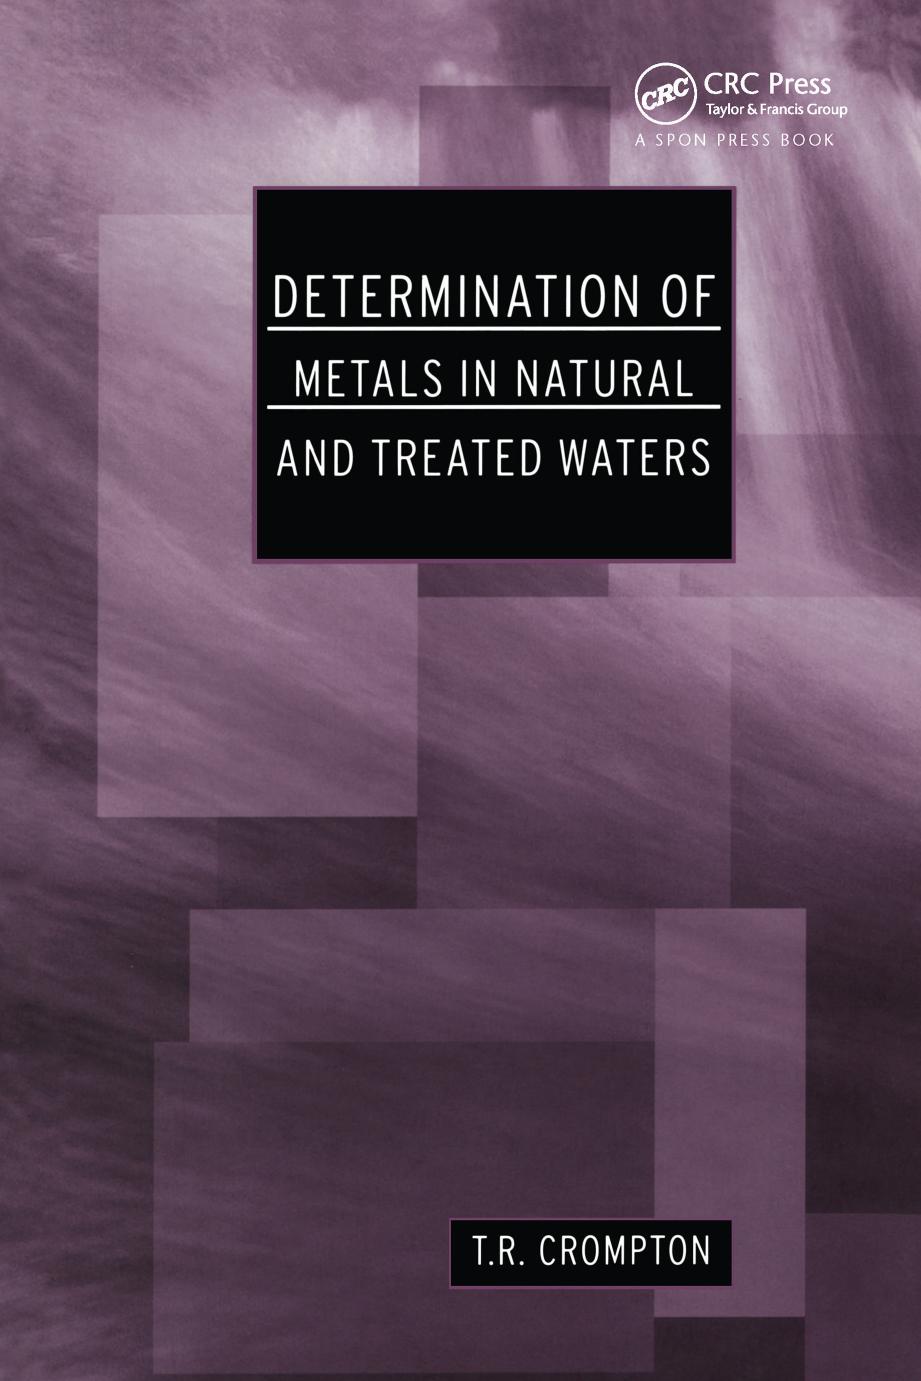 Determination of metals in natural and treated waters